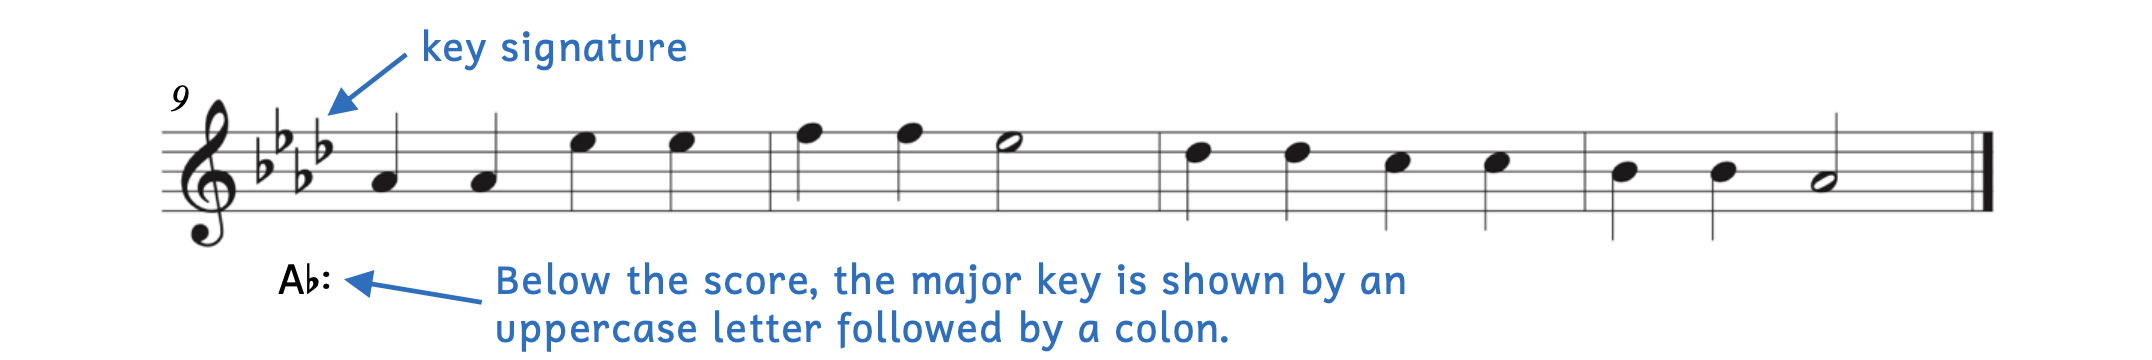 "Twinkle Twinkle Little Star" with a key signature rather than accidentals. Below the score, the major key is shown by an uppercase letter followed by a colon.